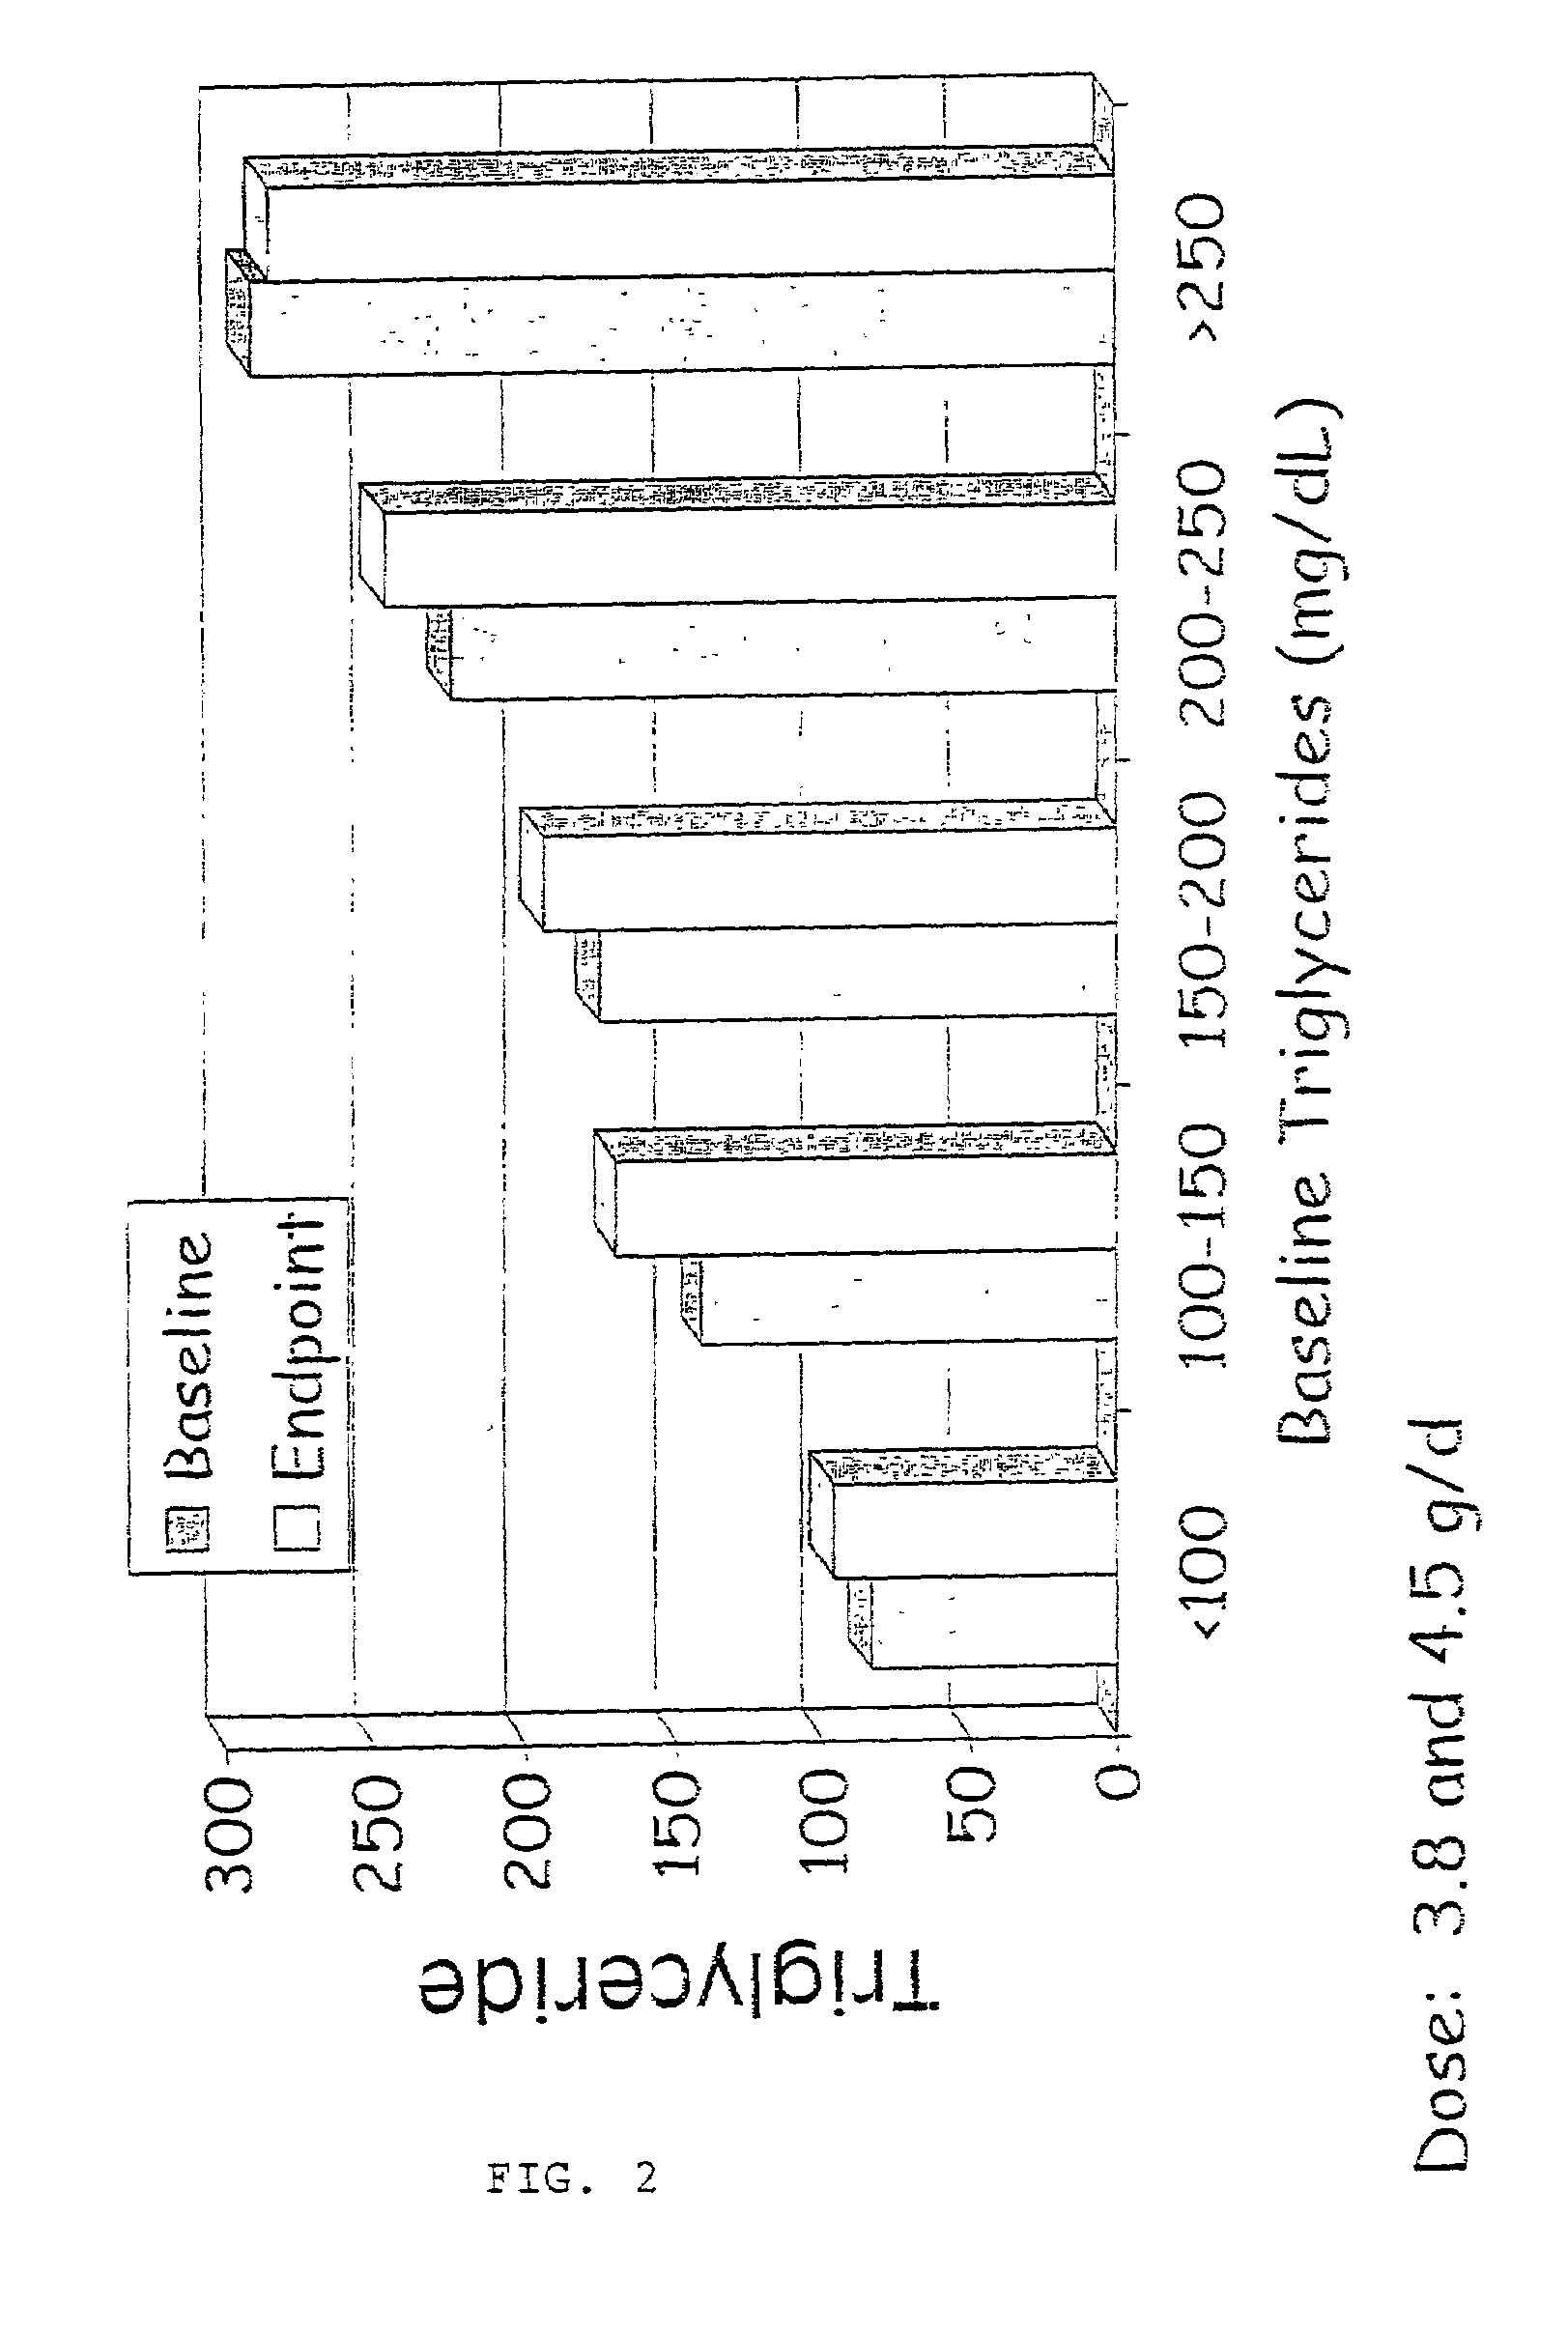 Methods of treating Syndrome X with aliphatic polyamines